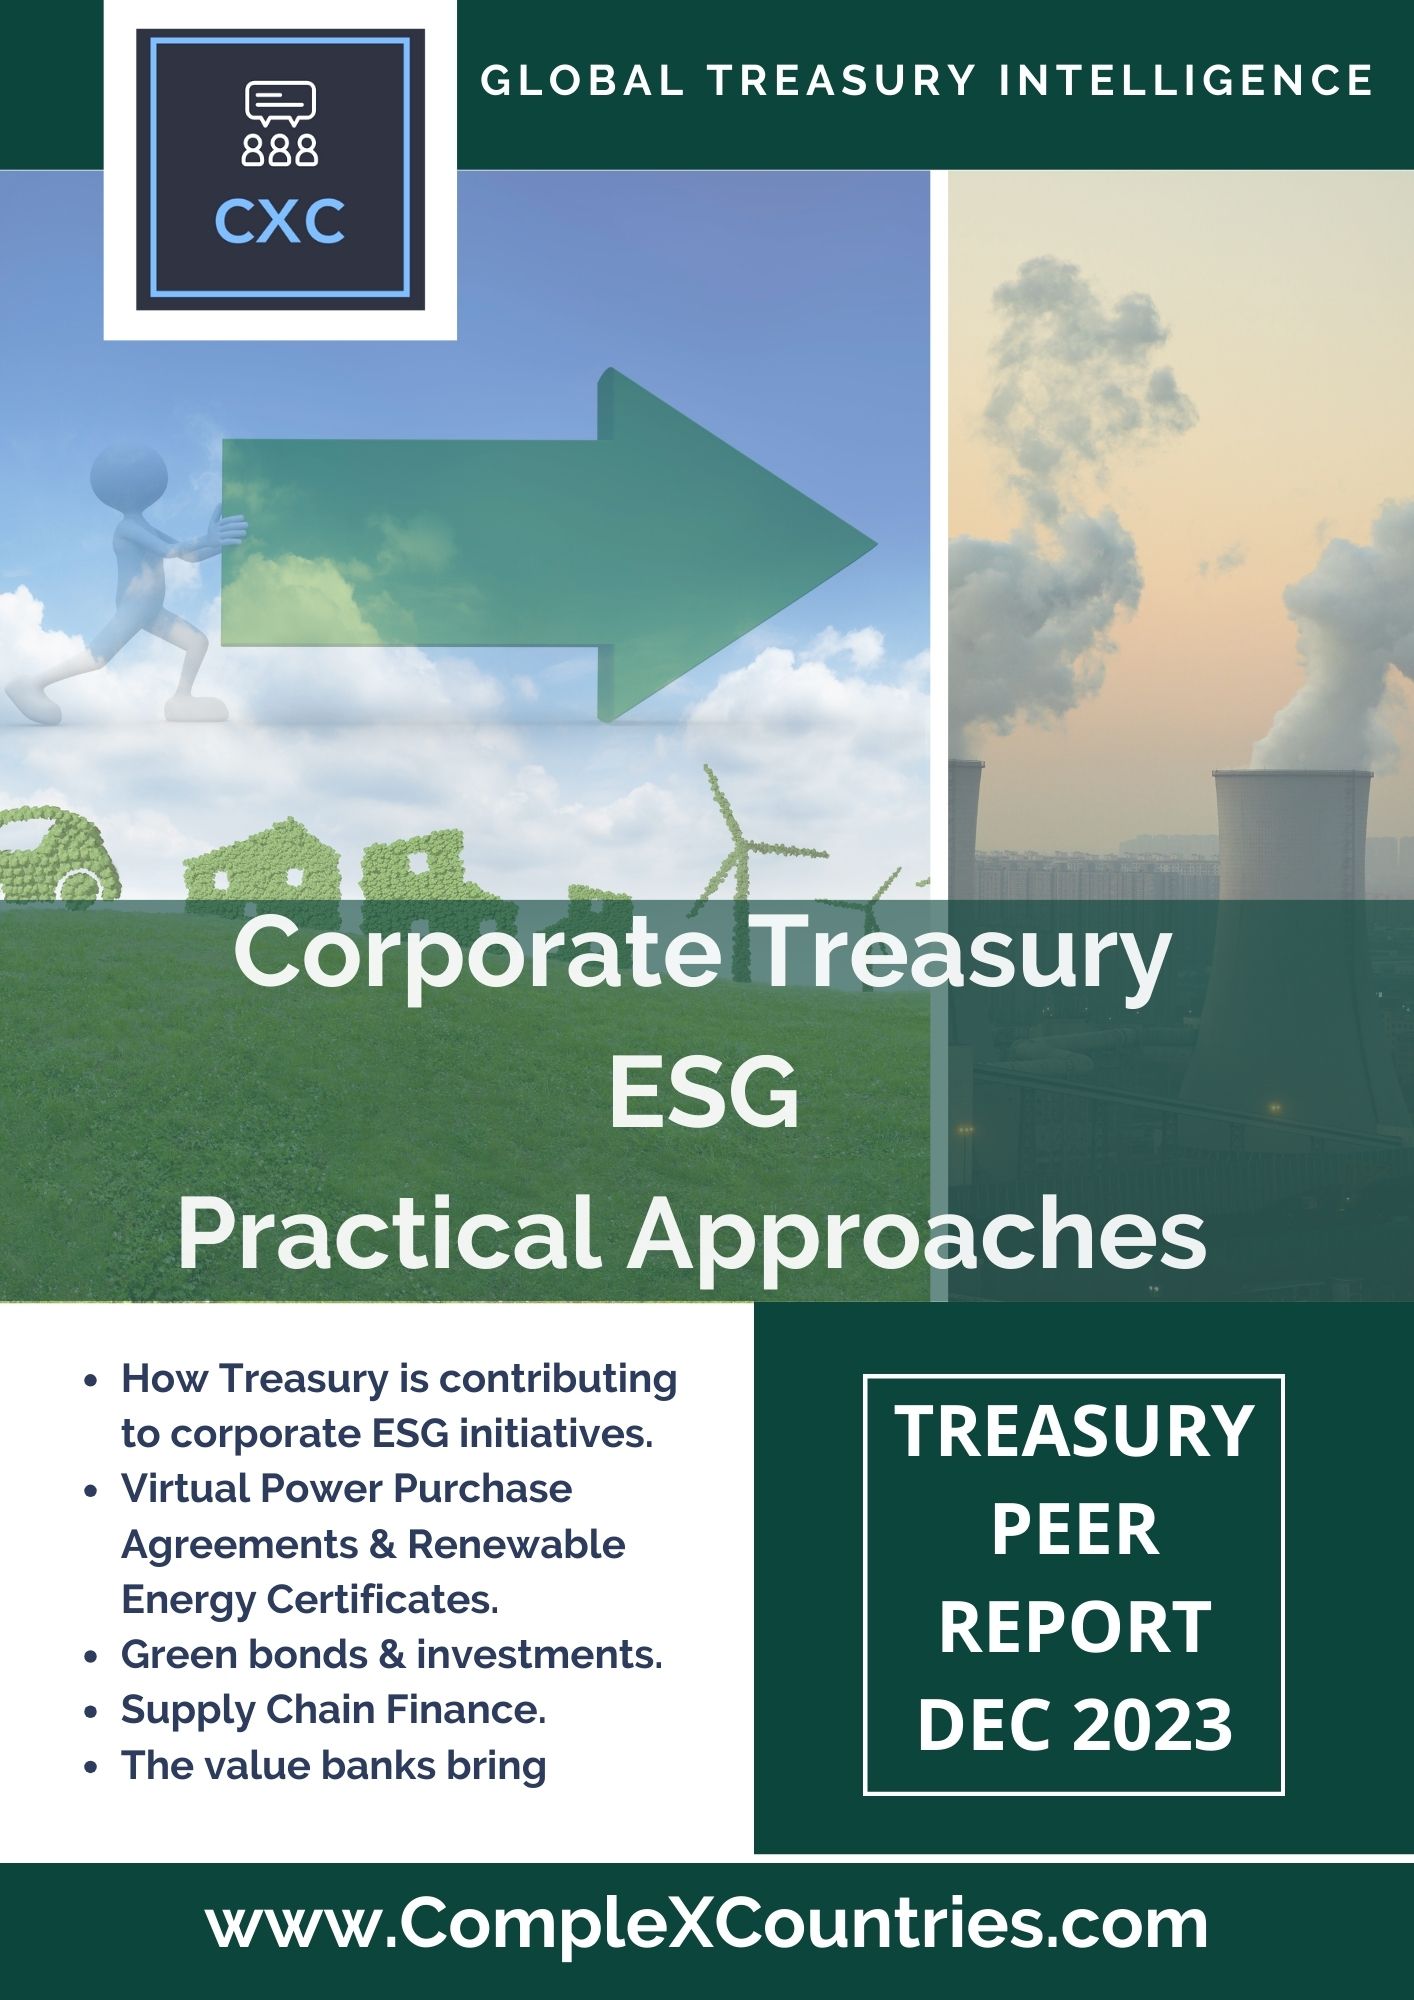 Corporate Treasury ESG Practical Approaches